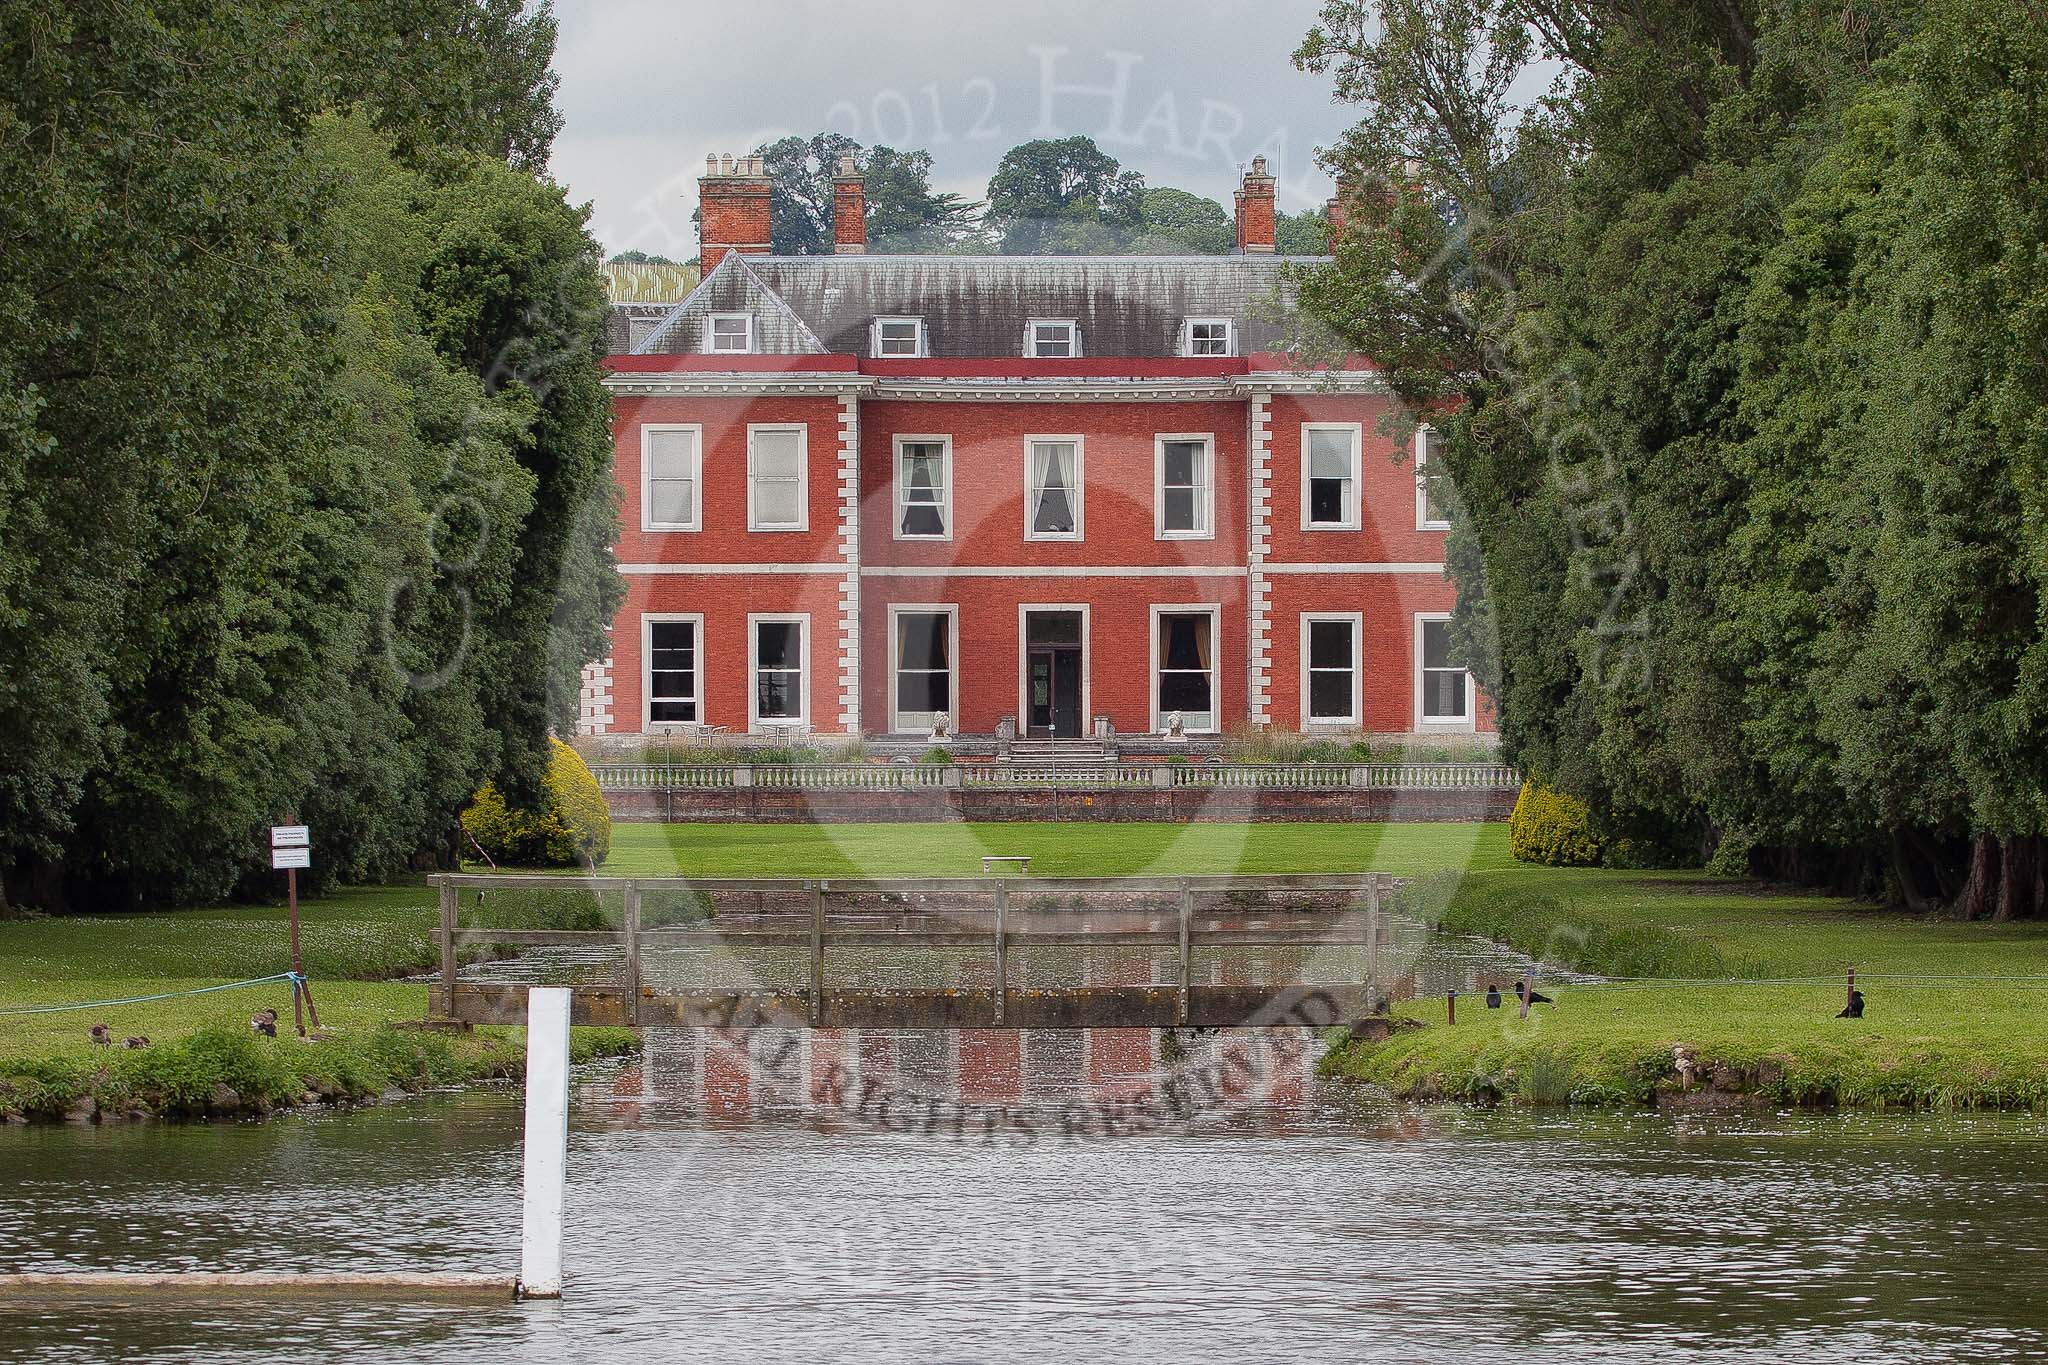 Henley Royal Regatta 2012 (Monday): Fawley Court, designed by Christopher Wren, with gardens landscaped by Lancelot 'Capability' Brown..
River Thames beteen Henley-on-Thames and Remenham/Temple Island ,
Henley-on-Thames,
Oxfordshire,
United Kingdom,
on 25 June 2012 at 12:06, image #15